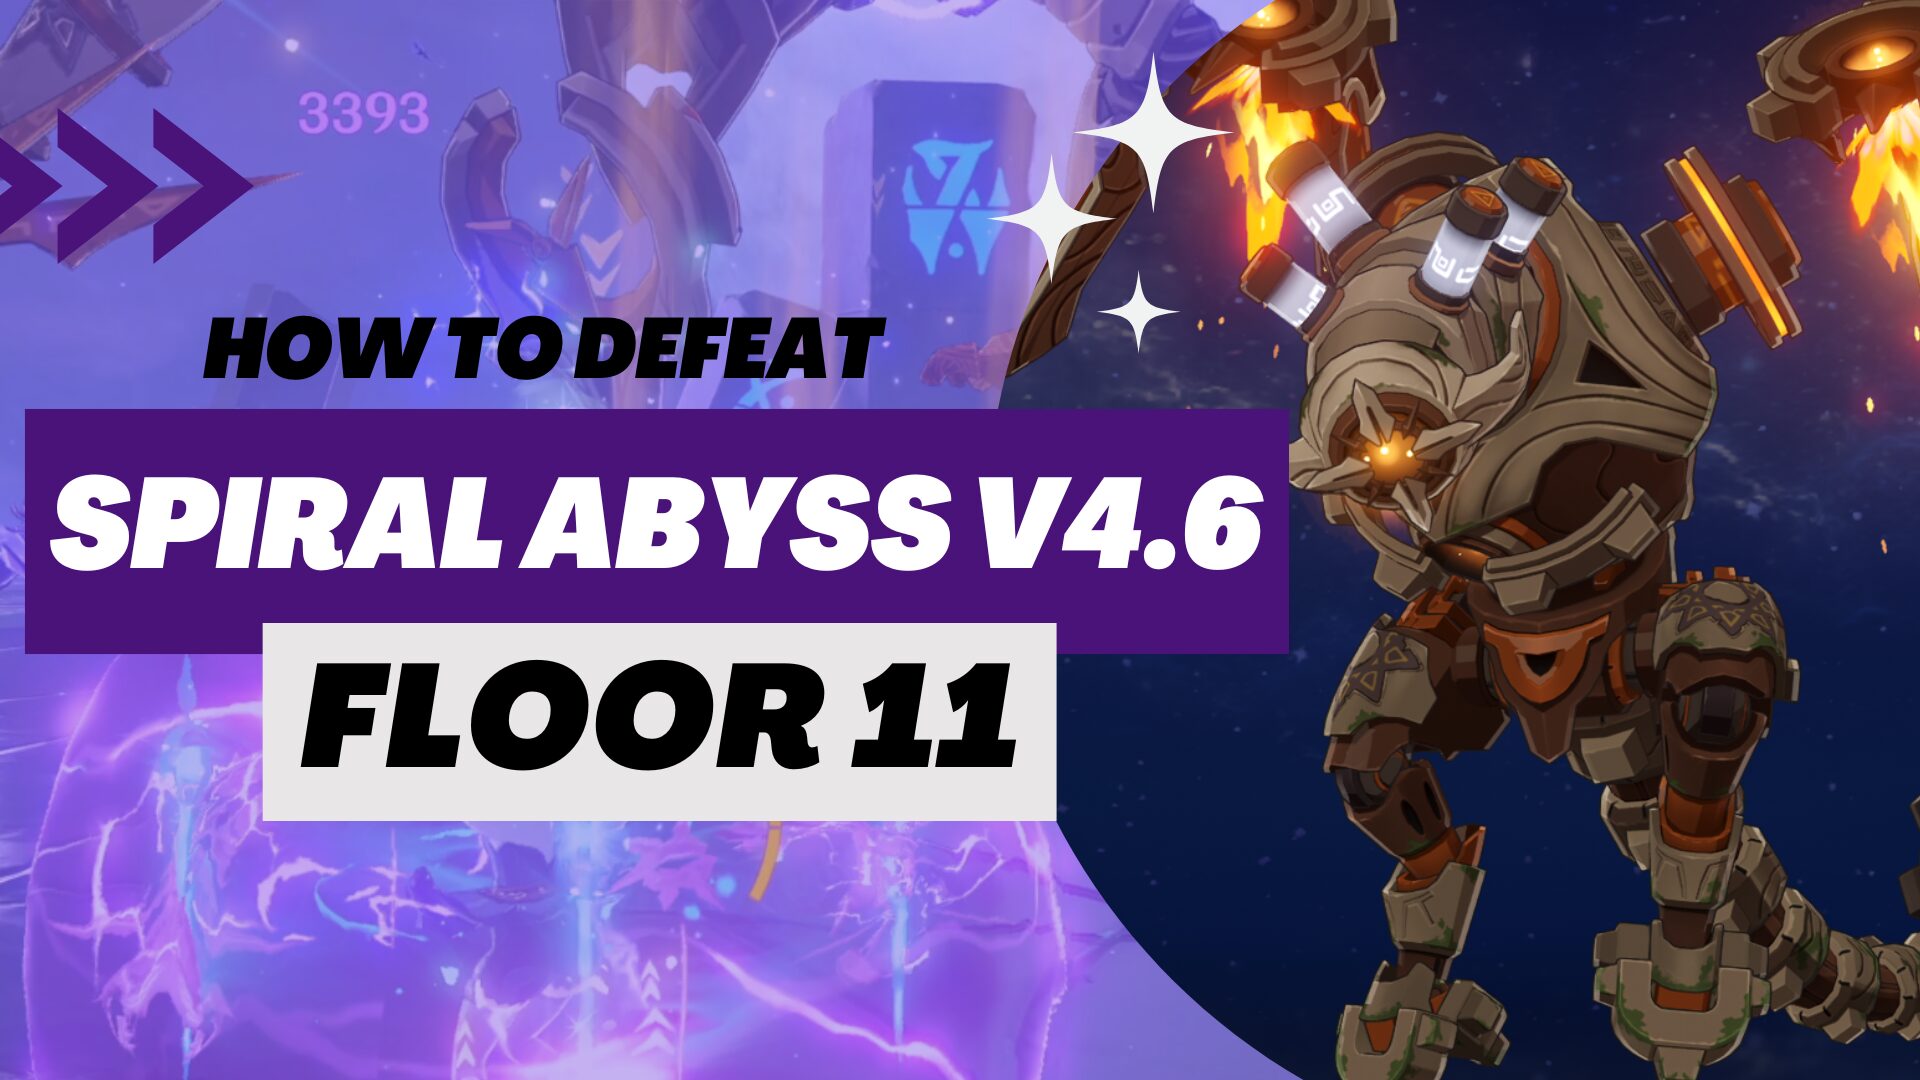 Genshin Impact: Spiral Abyss V4.6 Floor 11 Complete Guide